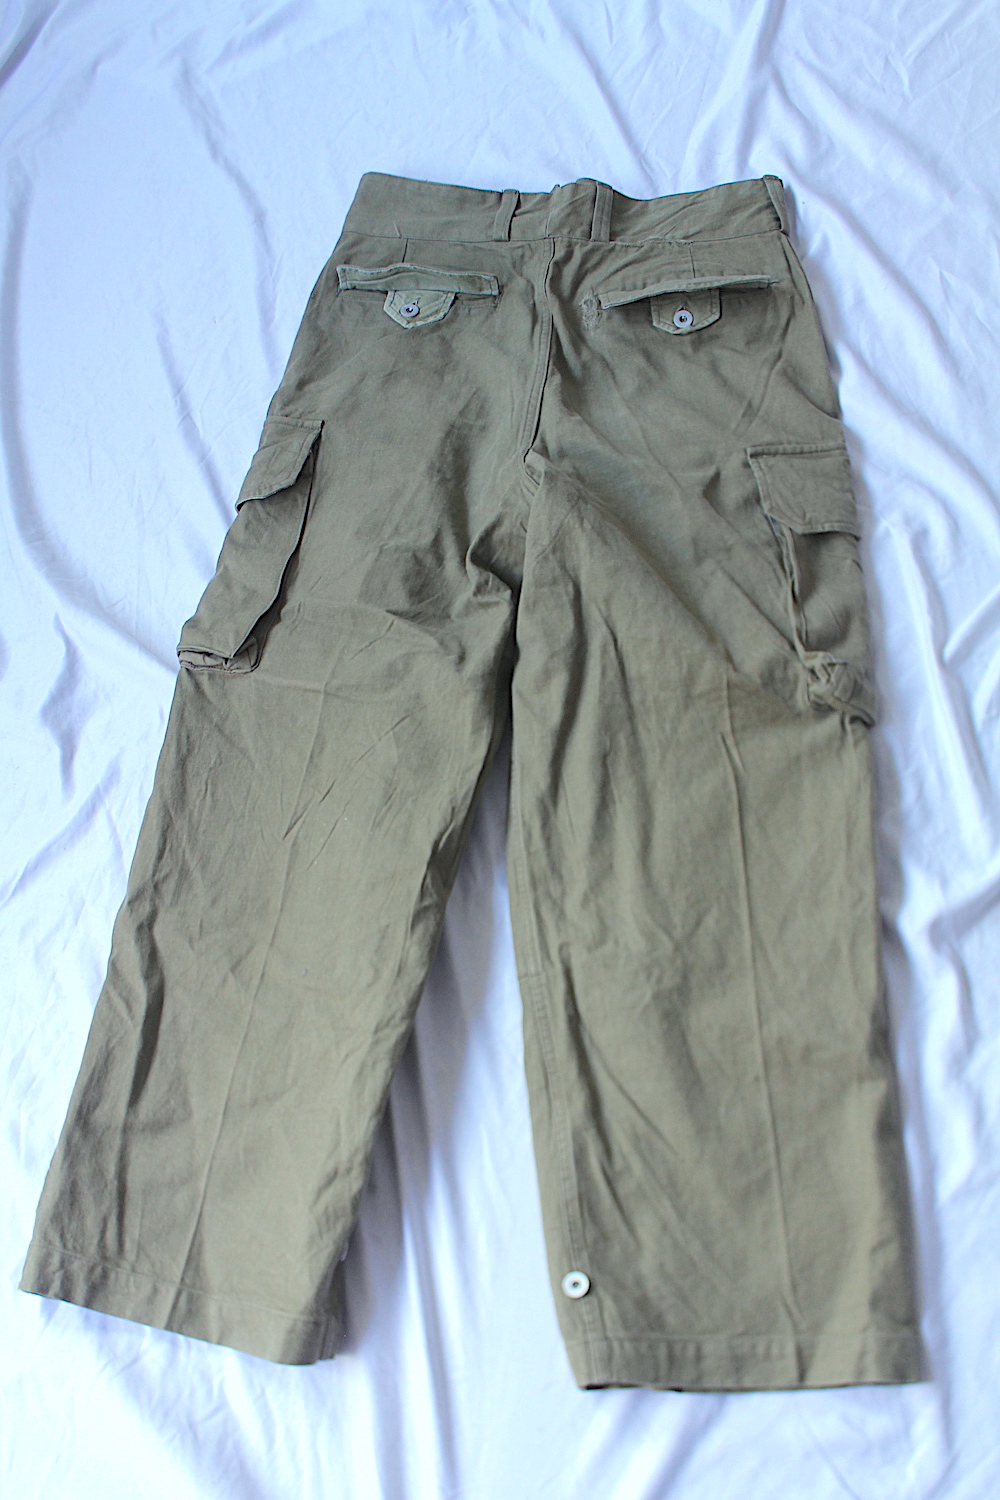 VINTAGE 50s FRENCH MILITARY”M-47 Cargo Pants 前期 METAL BUTTON 